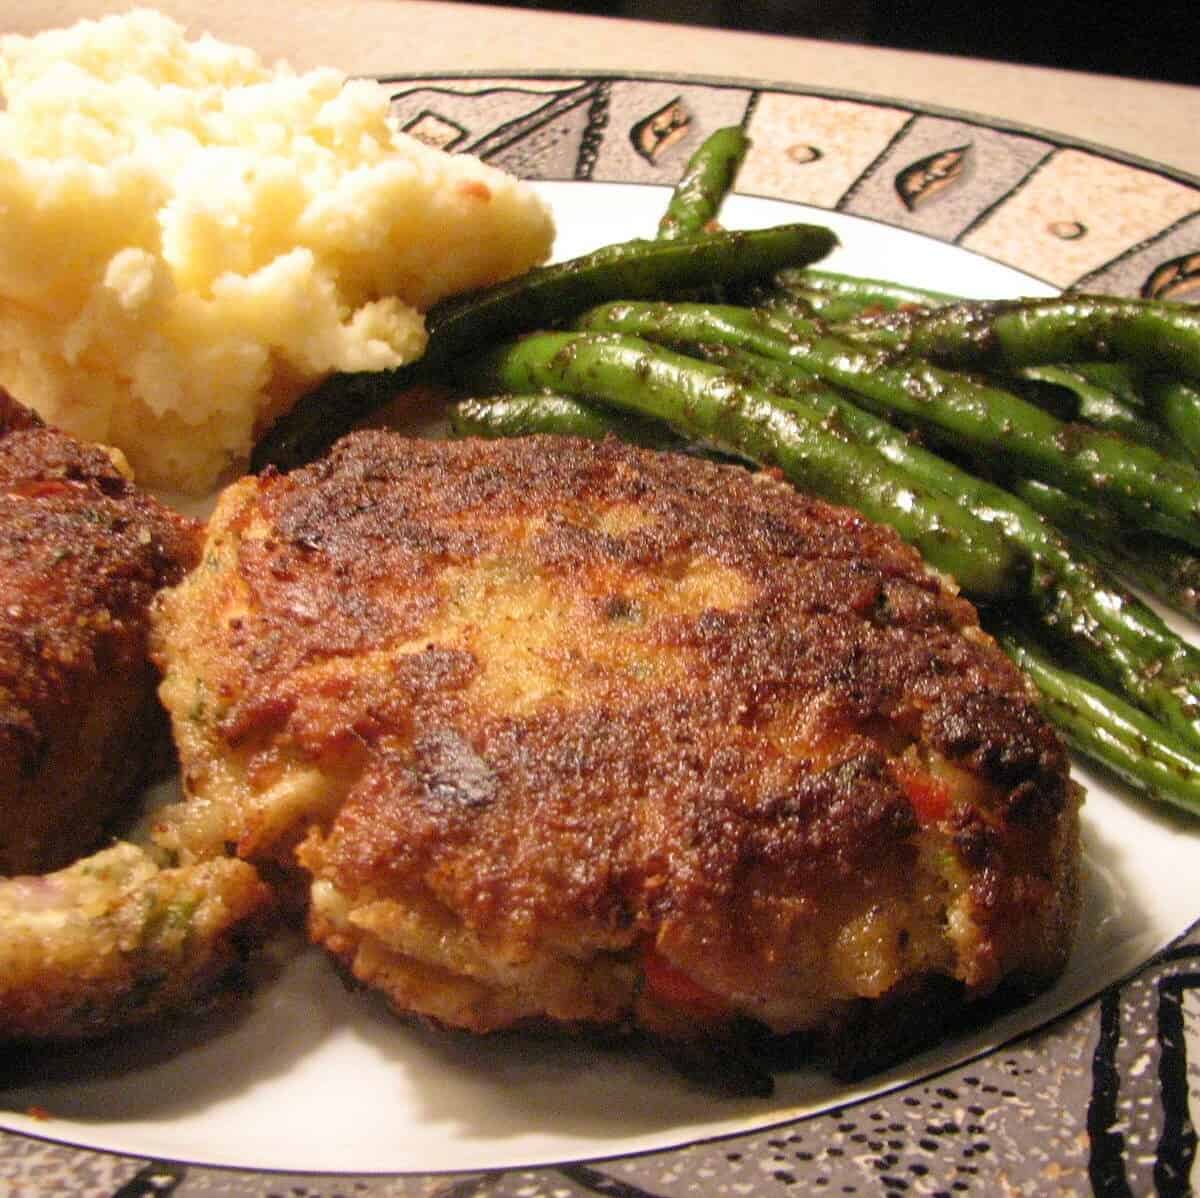 Delicious Crab Cakes Recipe for Seafood Lovers